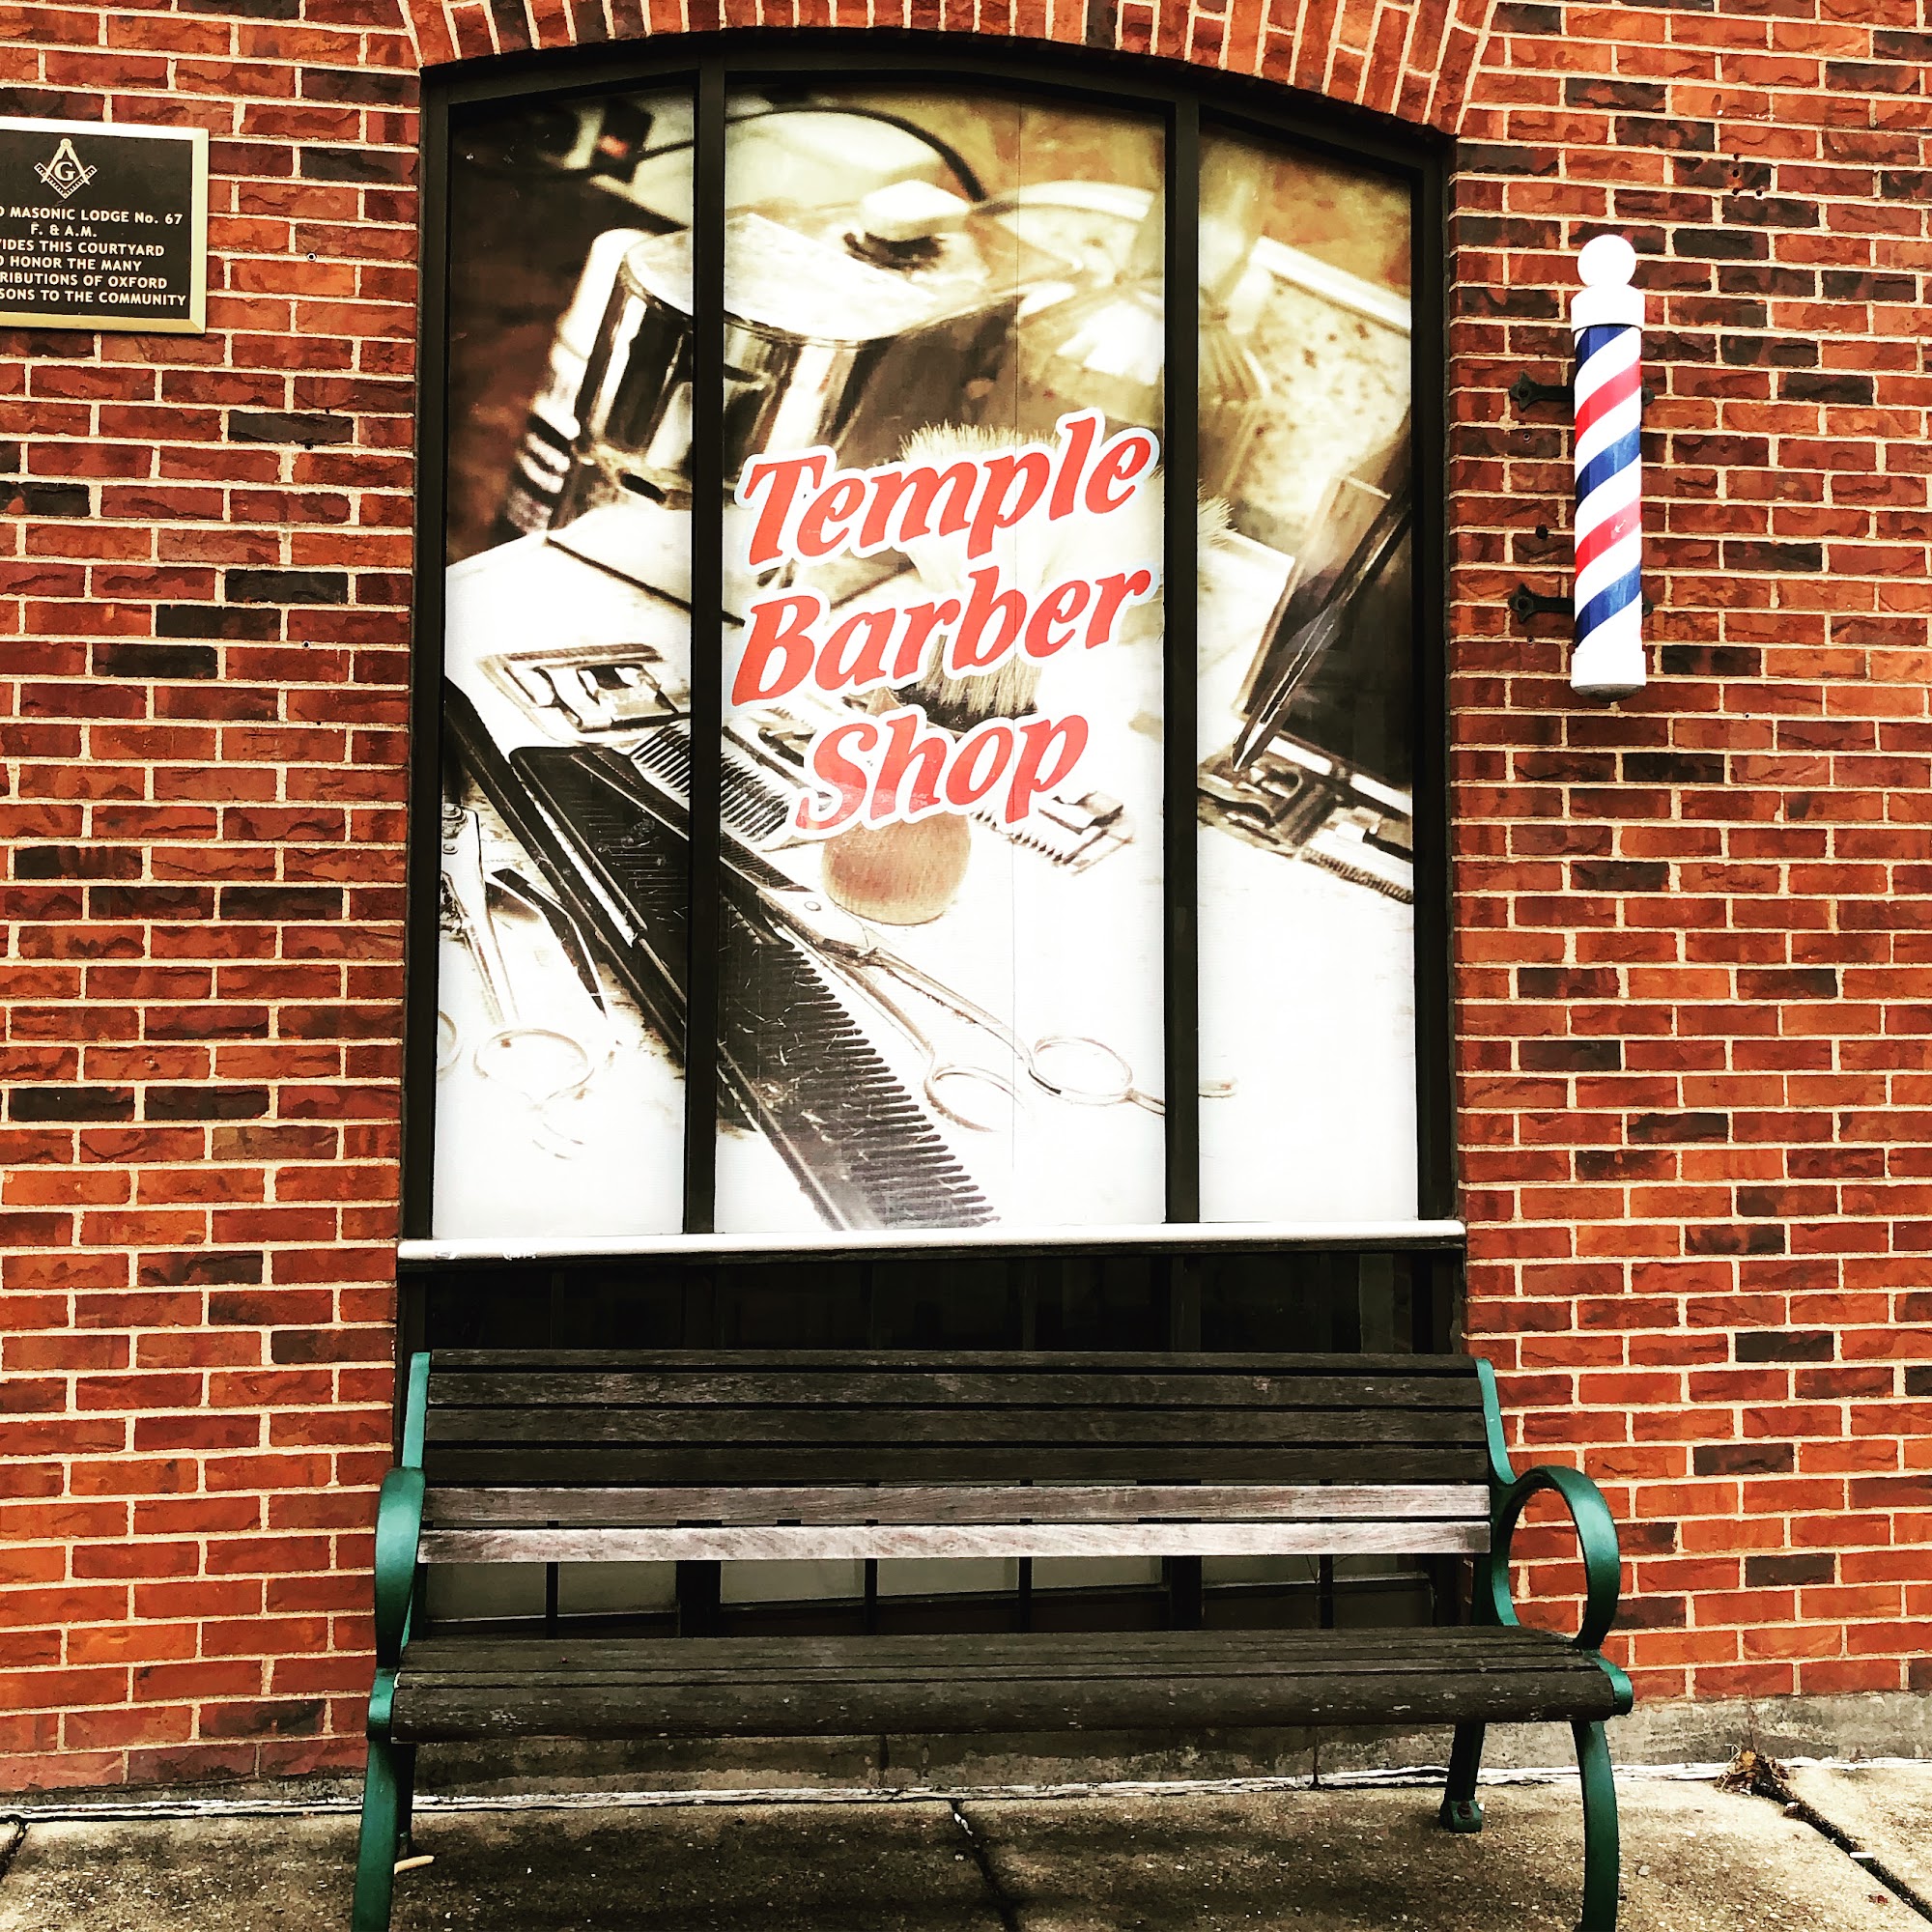 The Temple Barber Shop